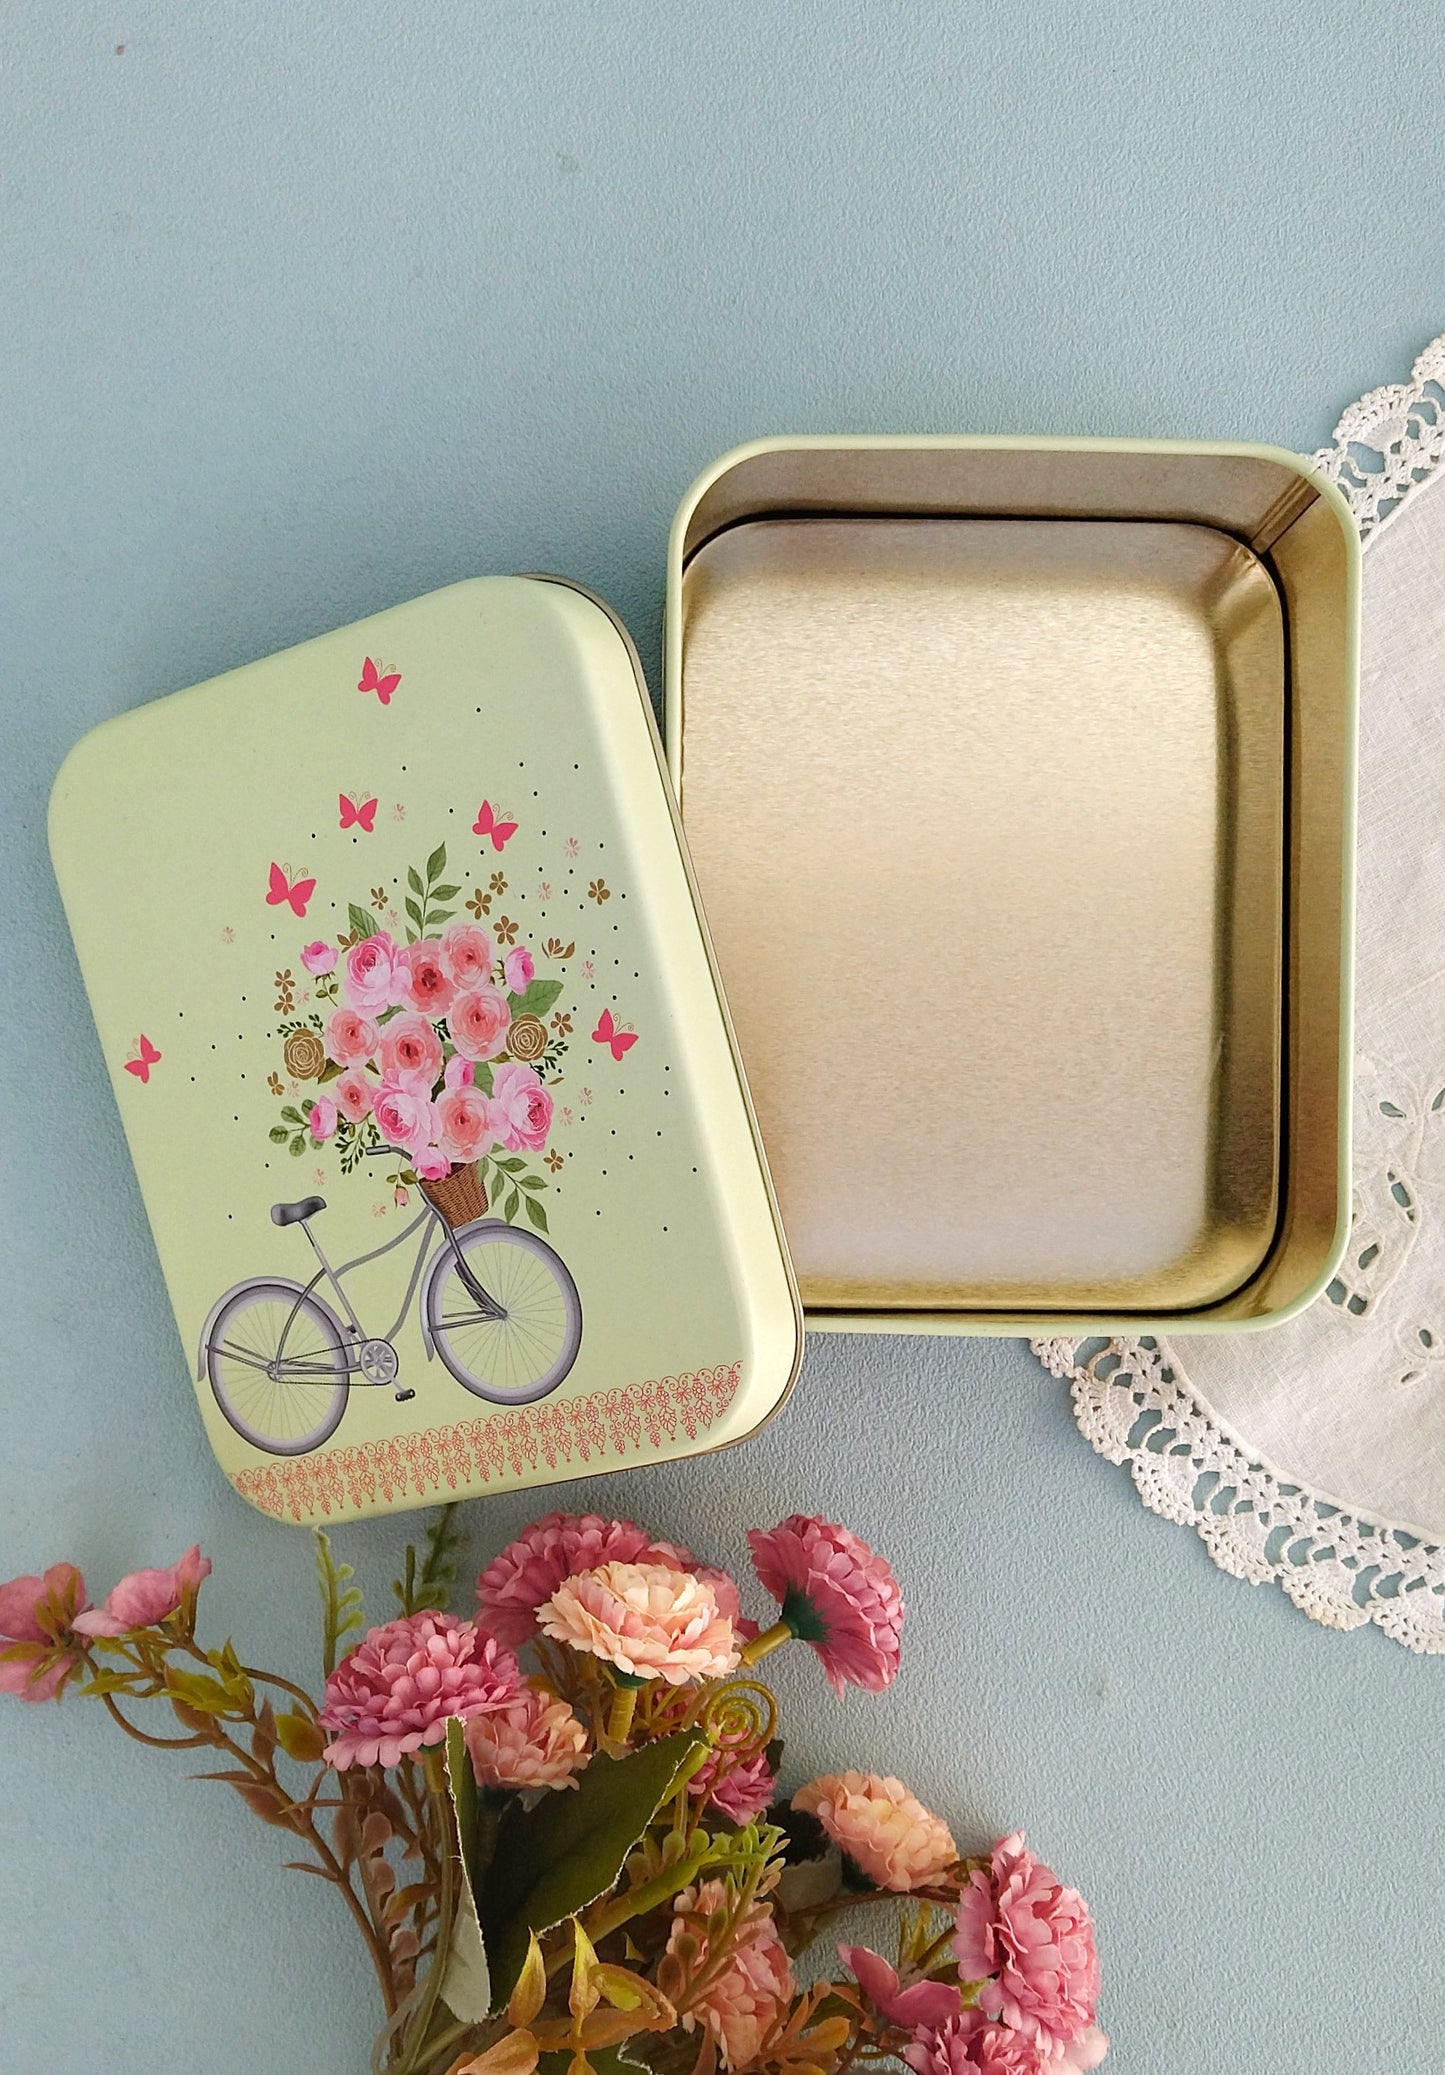 Cookies And Snacks Tin Box, Cute Metal Storage Box For Small Treasures